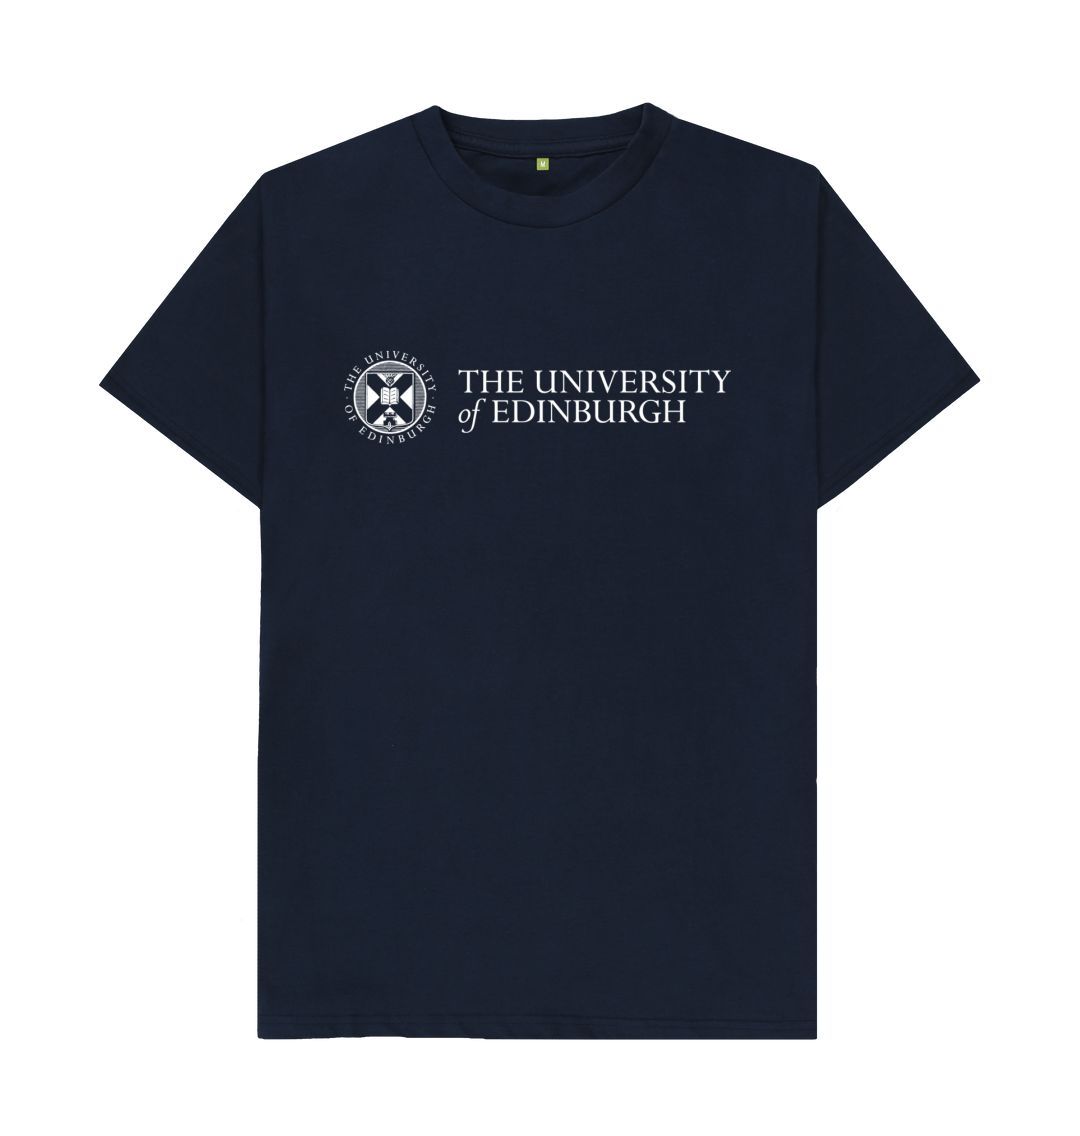 A navy blue t-shirt with the University logo printed across the chest in white